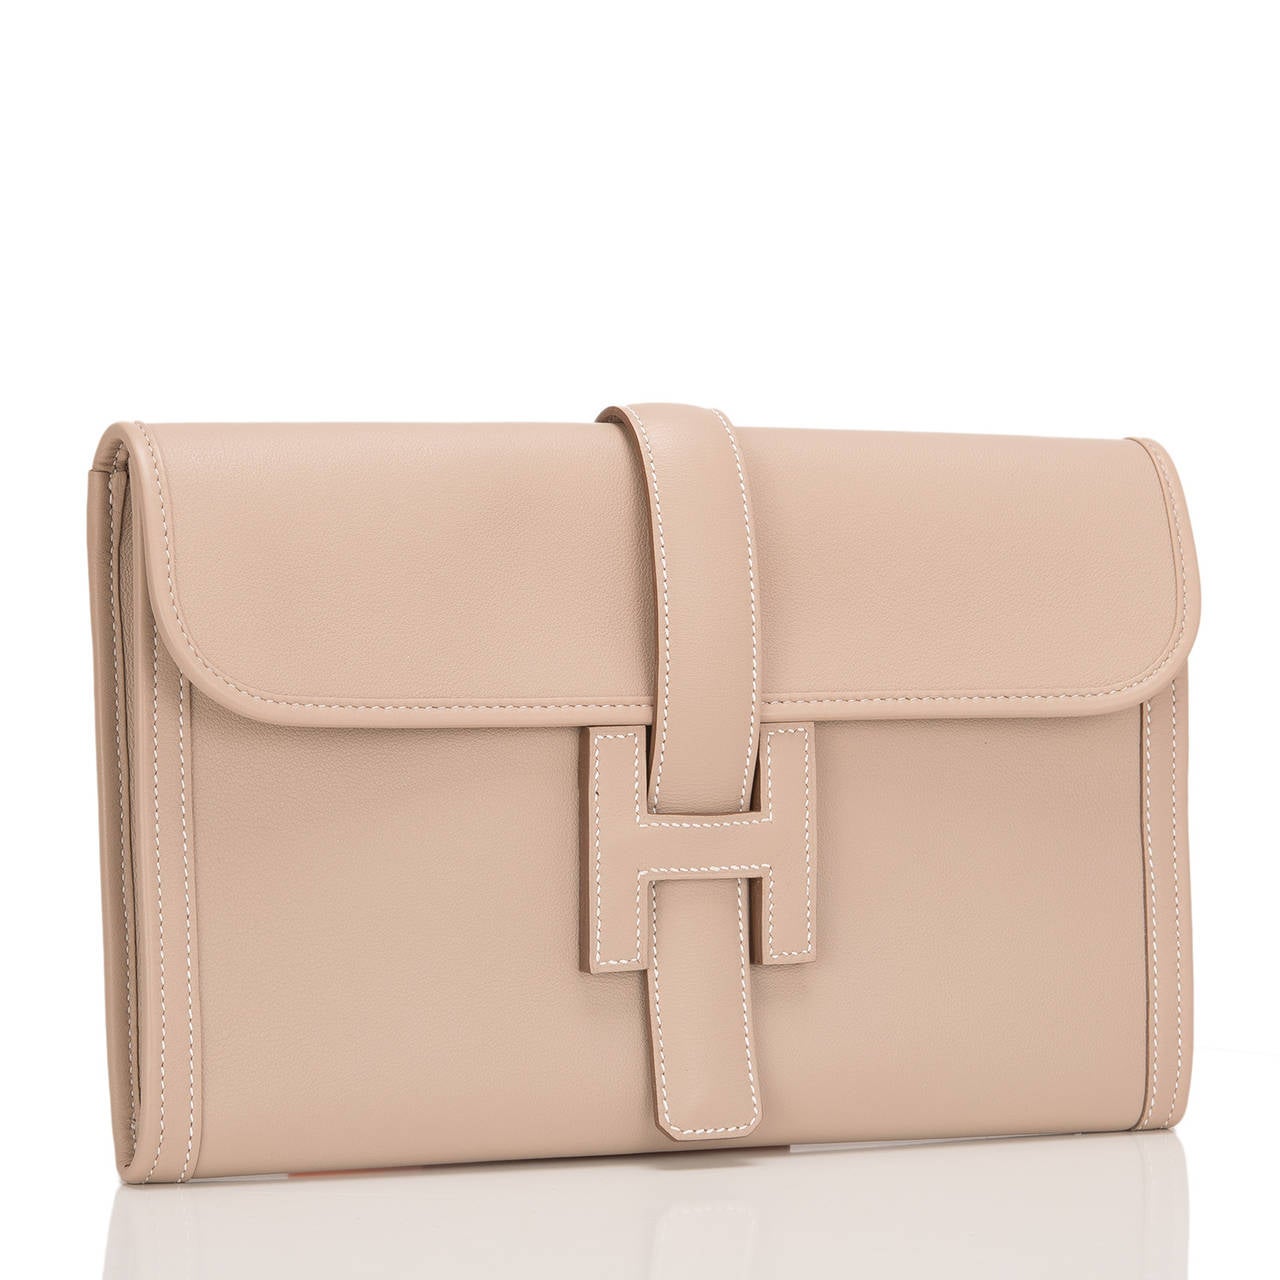 Hermes Argile swift leather Jige PM clutch.

This style features white contrast stitching and front 